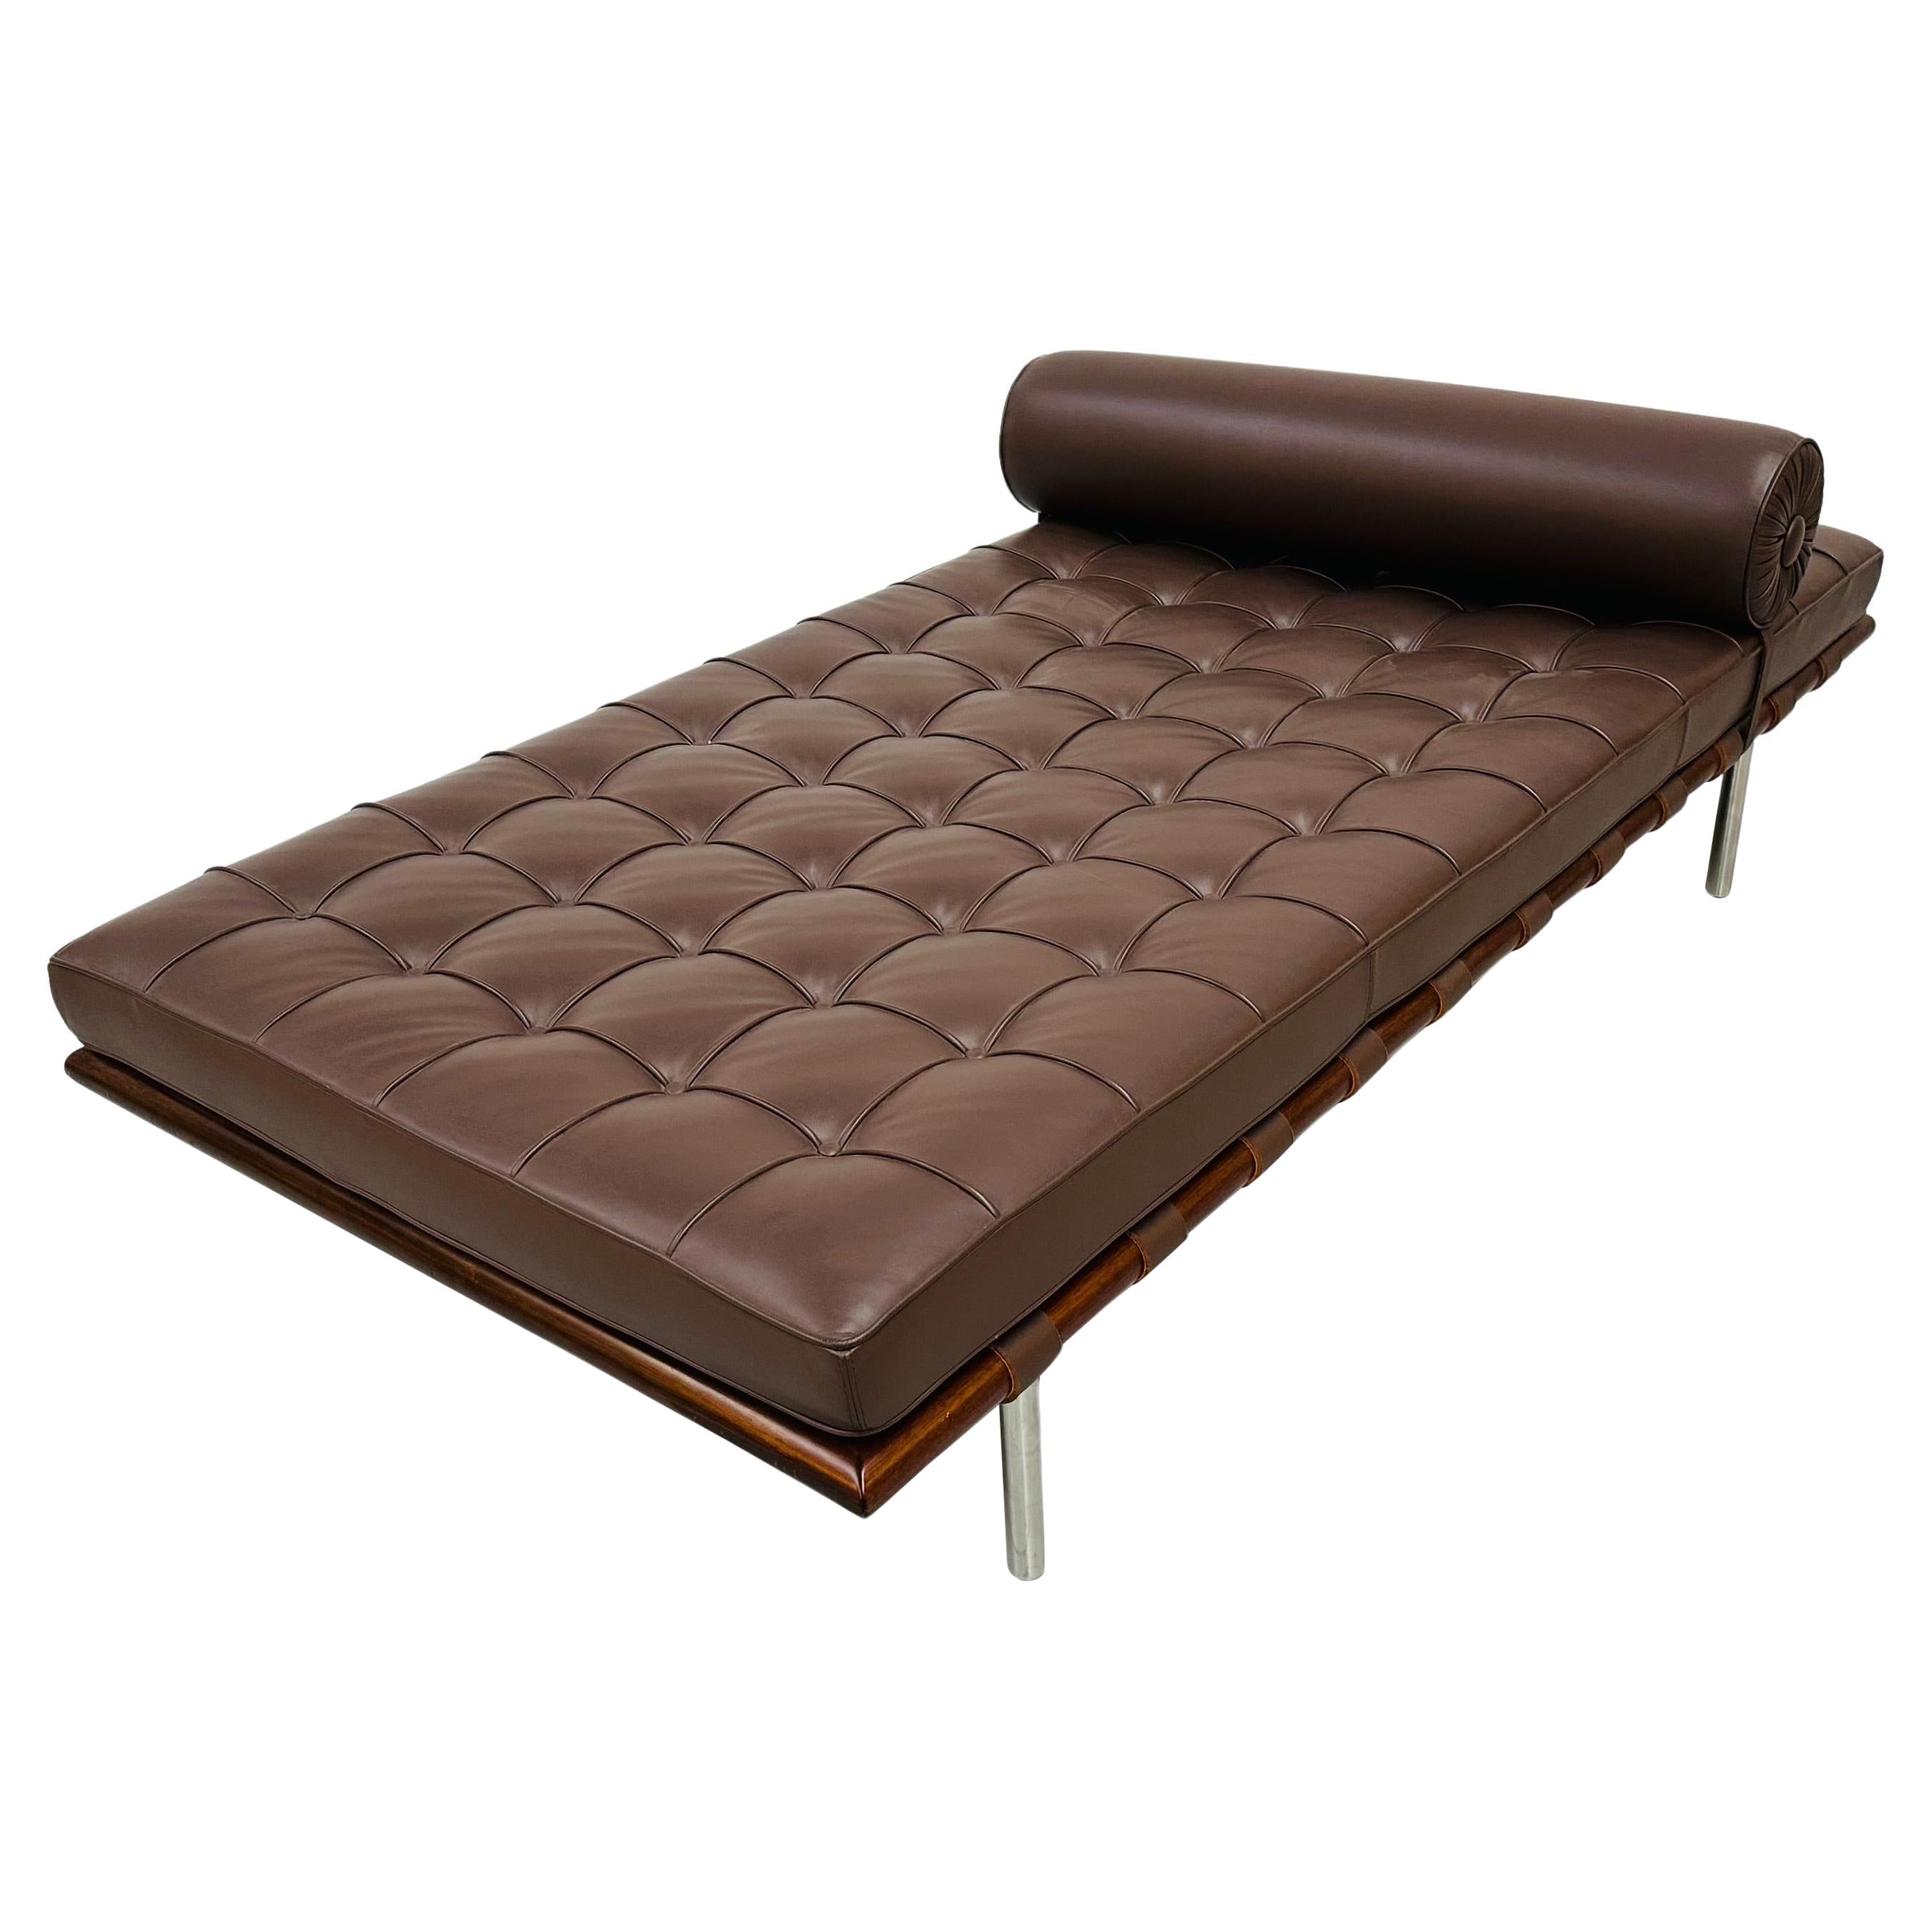 Barcelona Daybed in Brown Leather by Ludwig Mies van der Rohe for Knoll, 1980s. For Sale